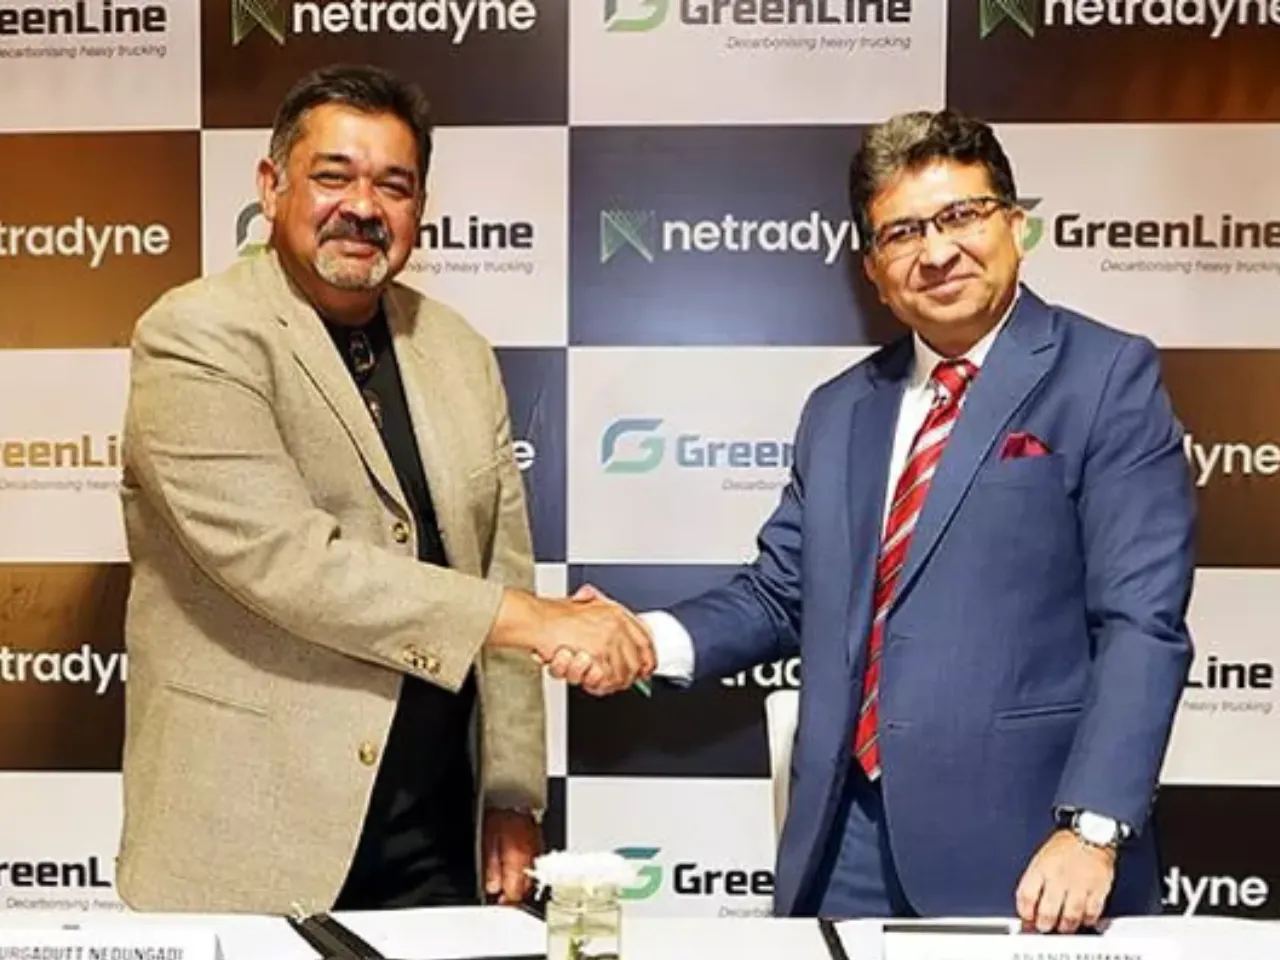 Netradyne partners with greenline mobility